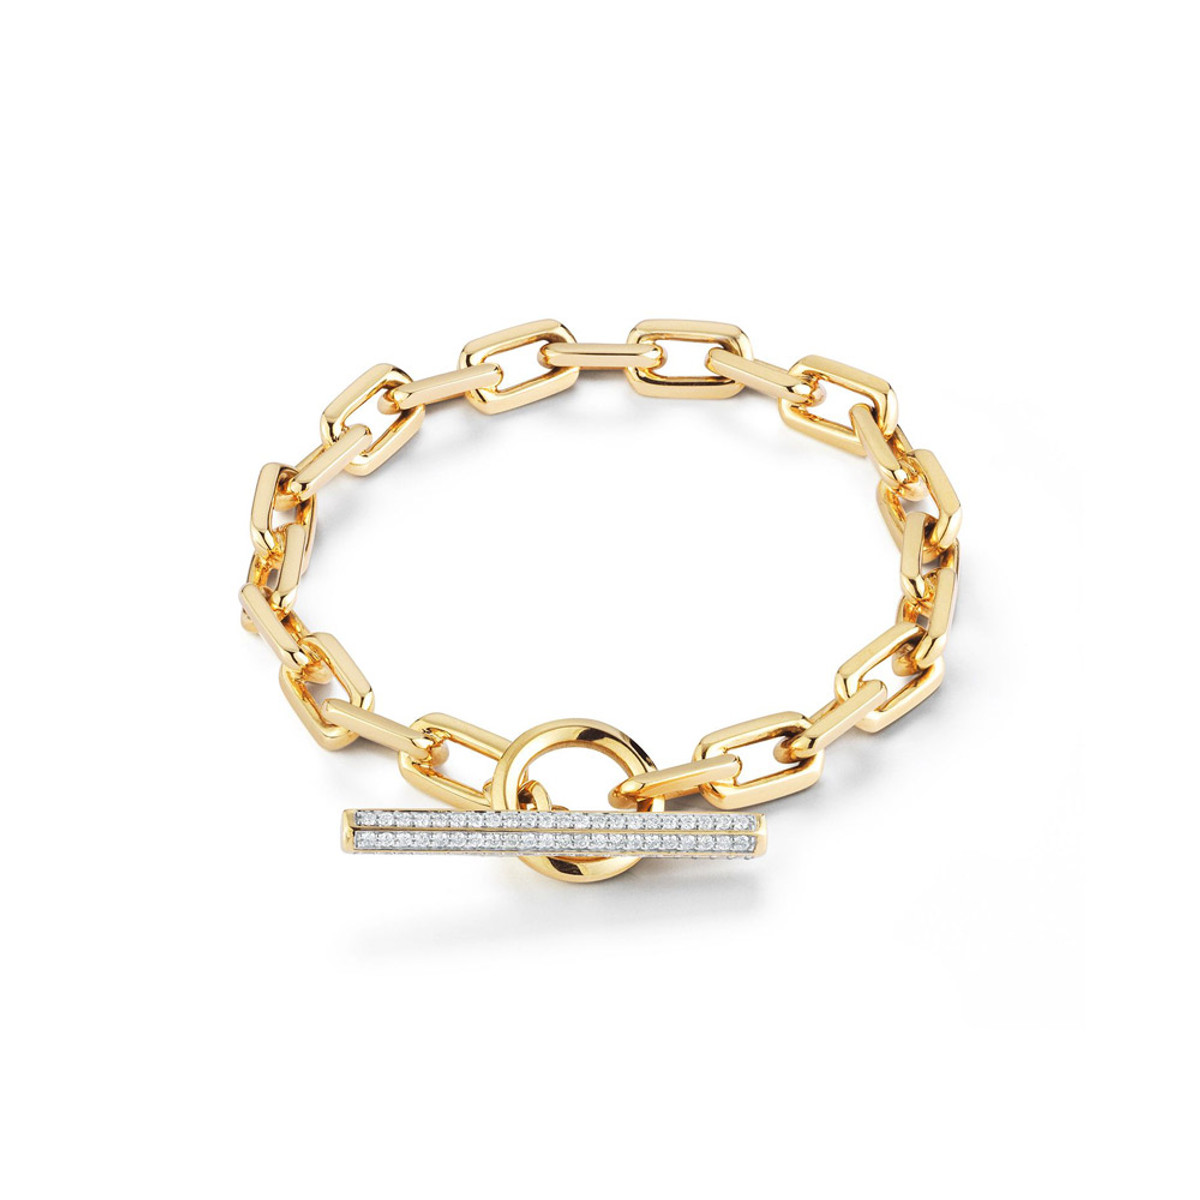 Walters Faith Saxon 18K Yellow Gold and Diamond Toggle Chain Link Bracelet-56173 Product Image